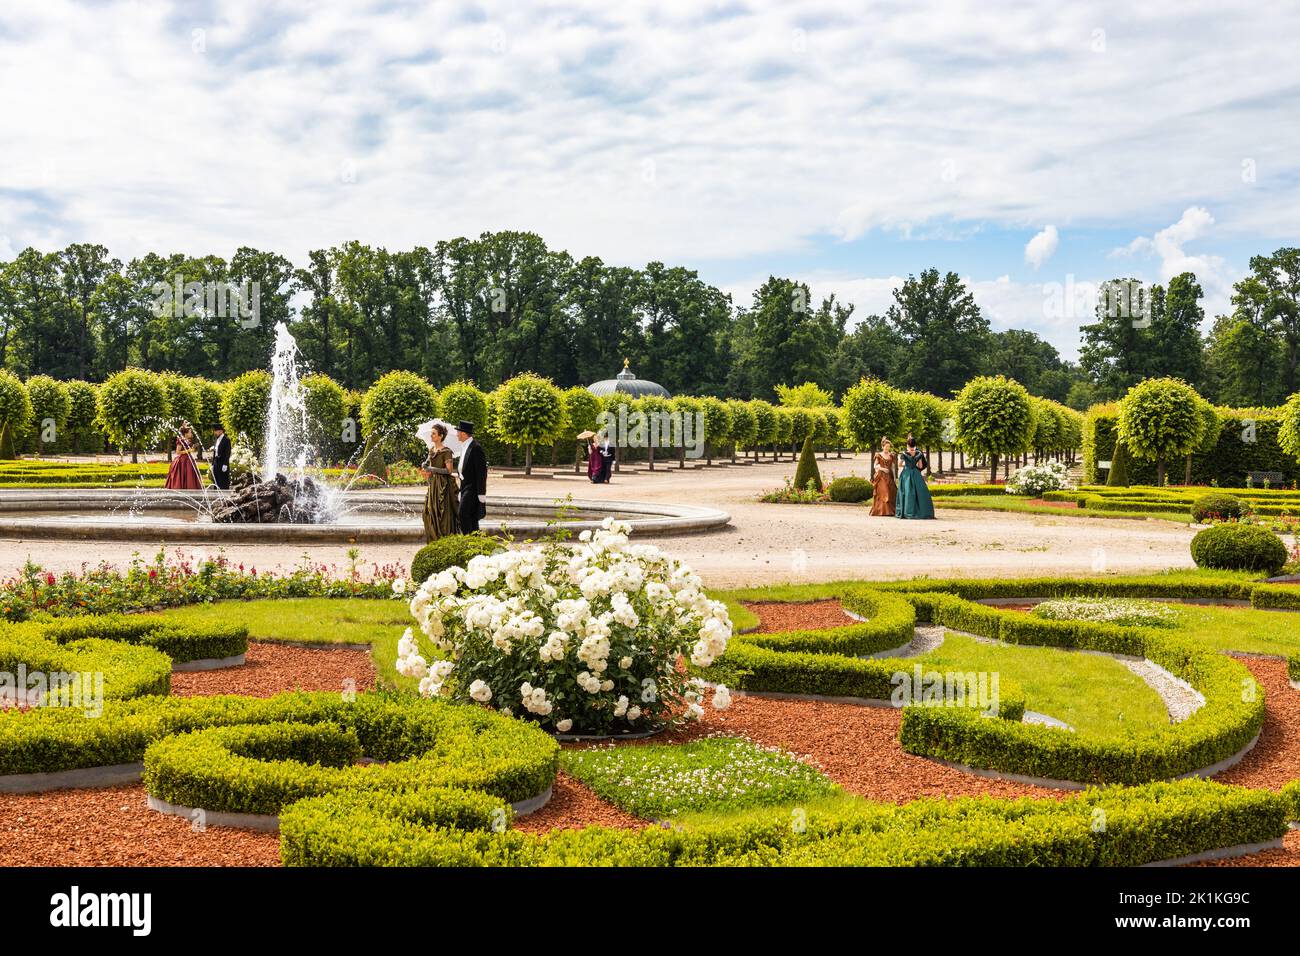 Gardens of Rundale palace in Latvia. Famous attraction place for tourists Stock Photo